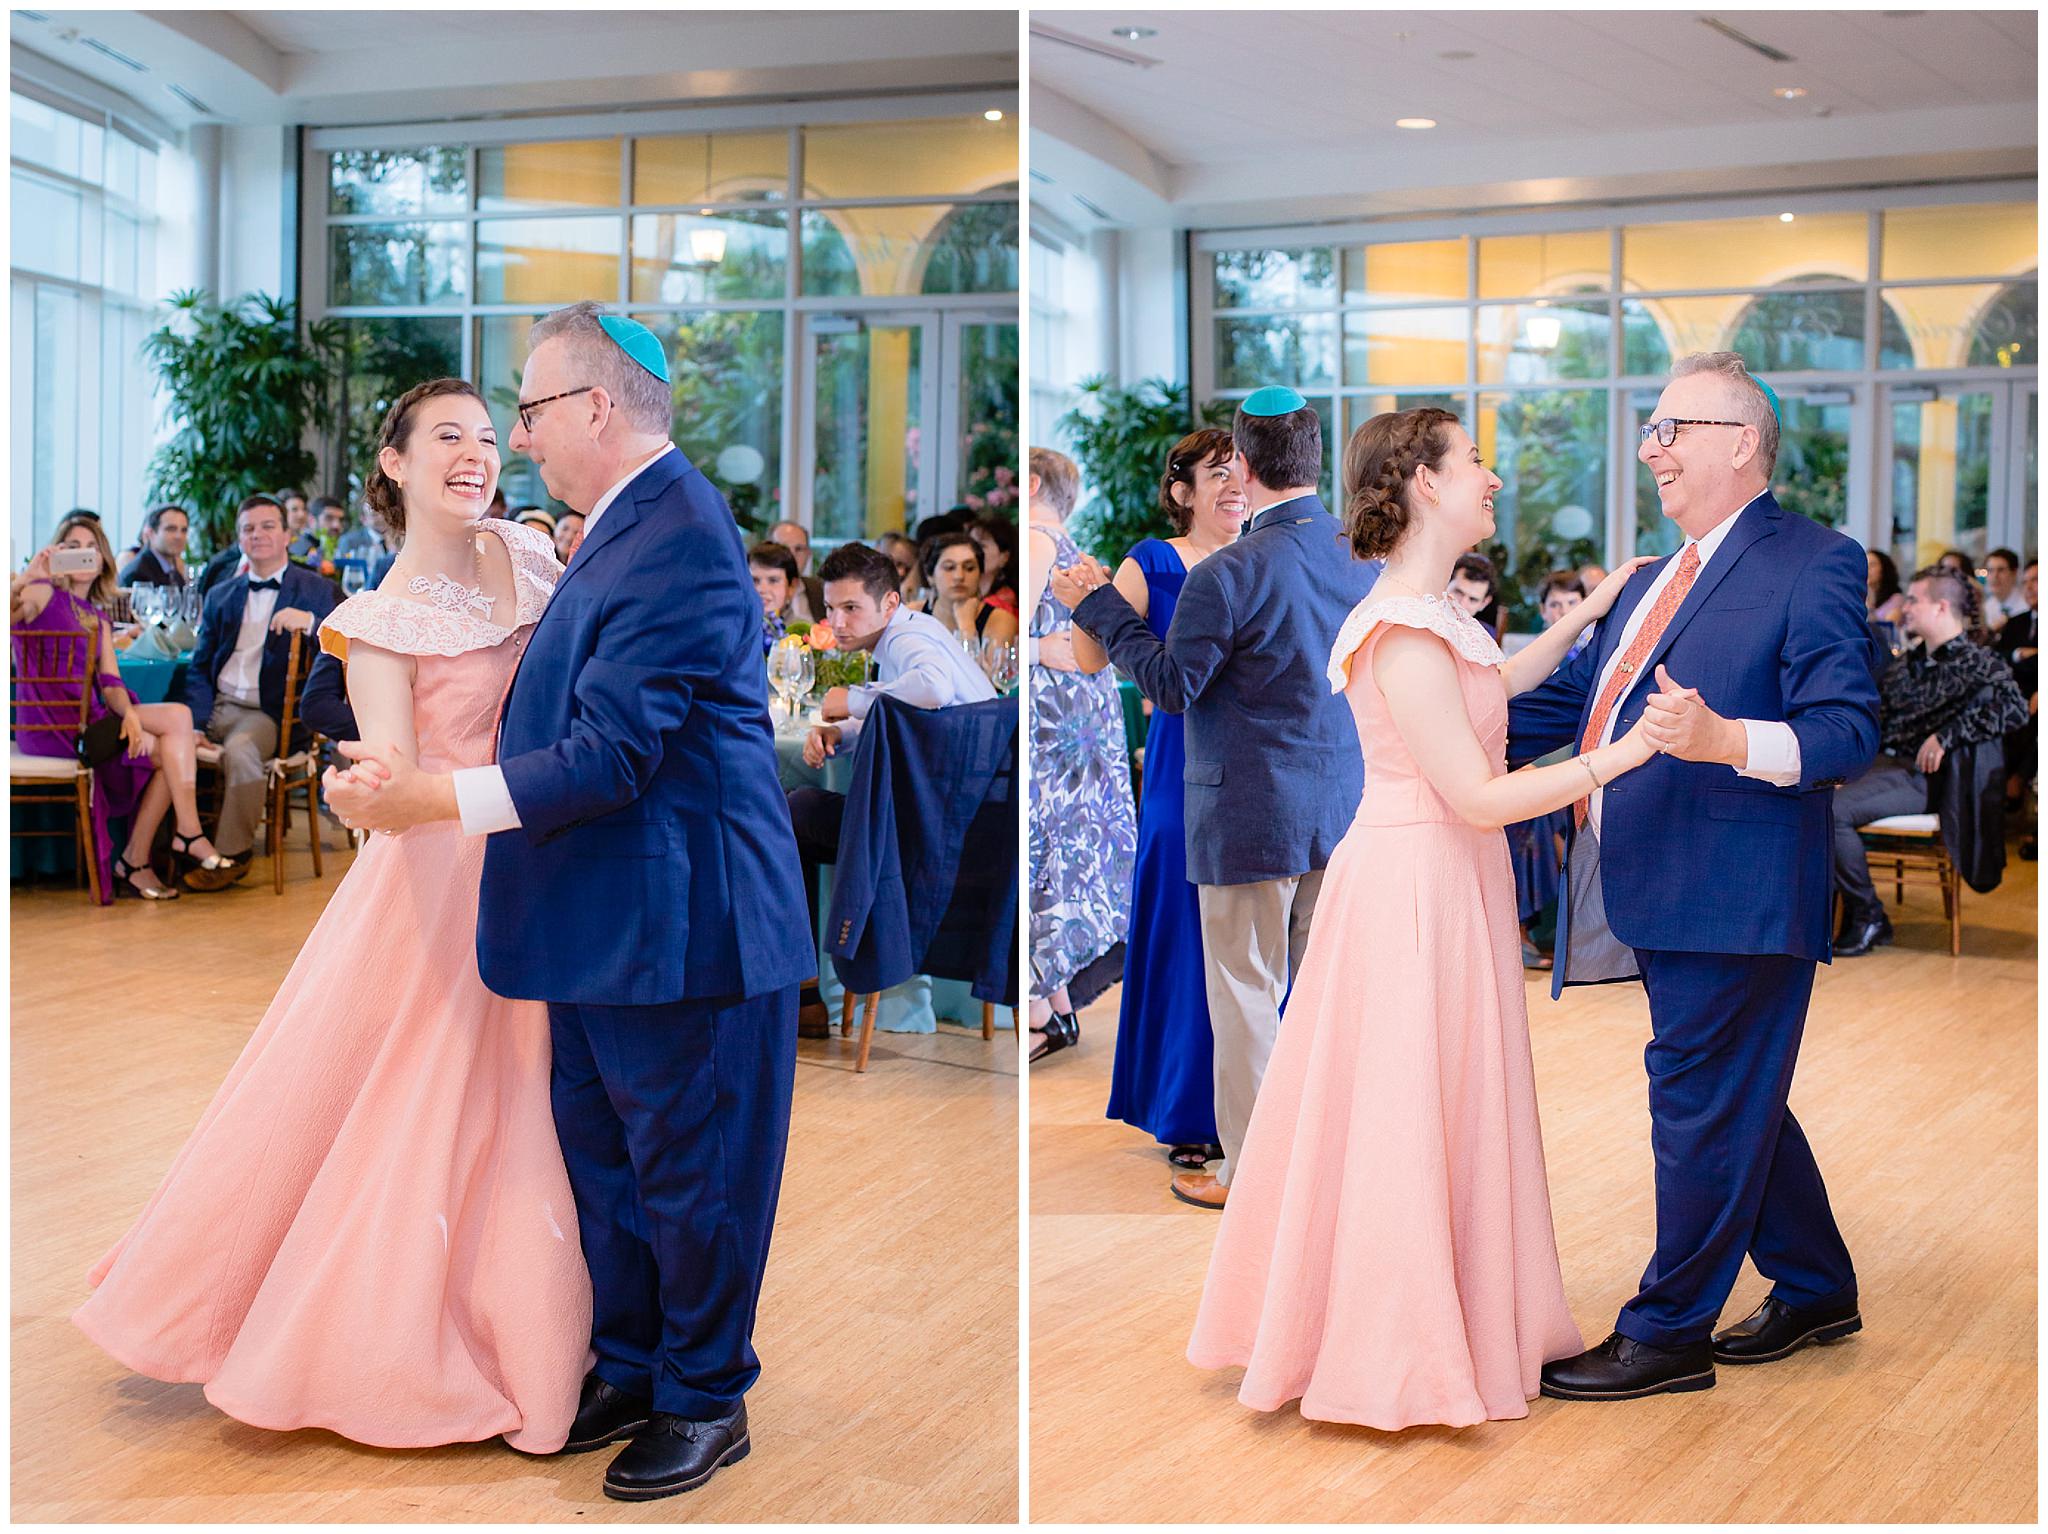 Father-daughter dance at a Phipps Conservatory wedding reception